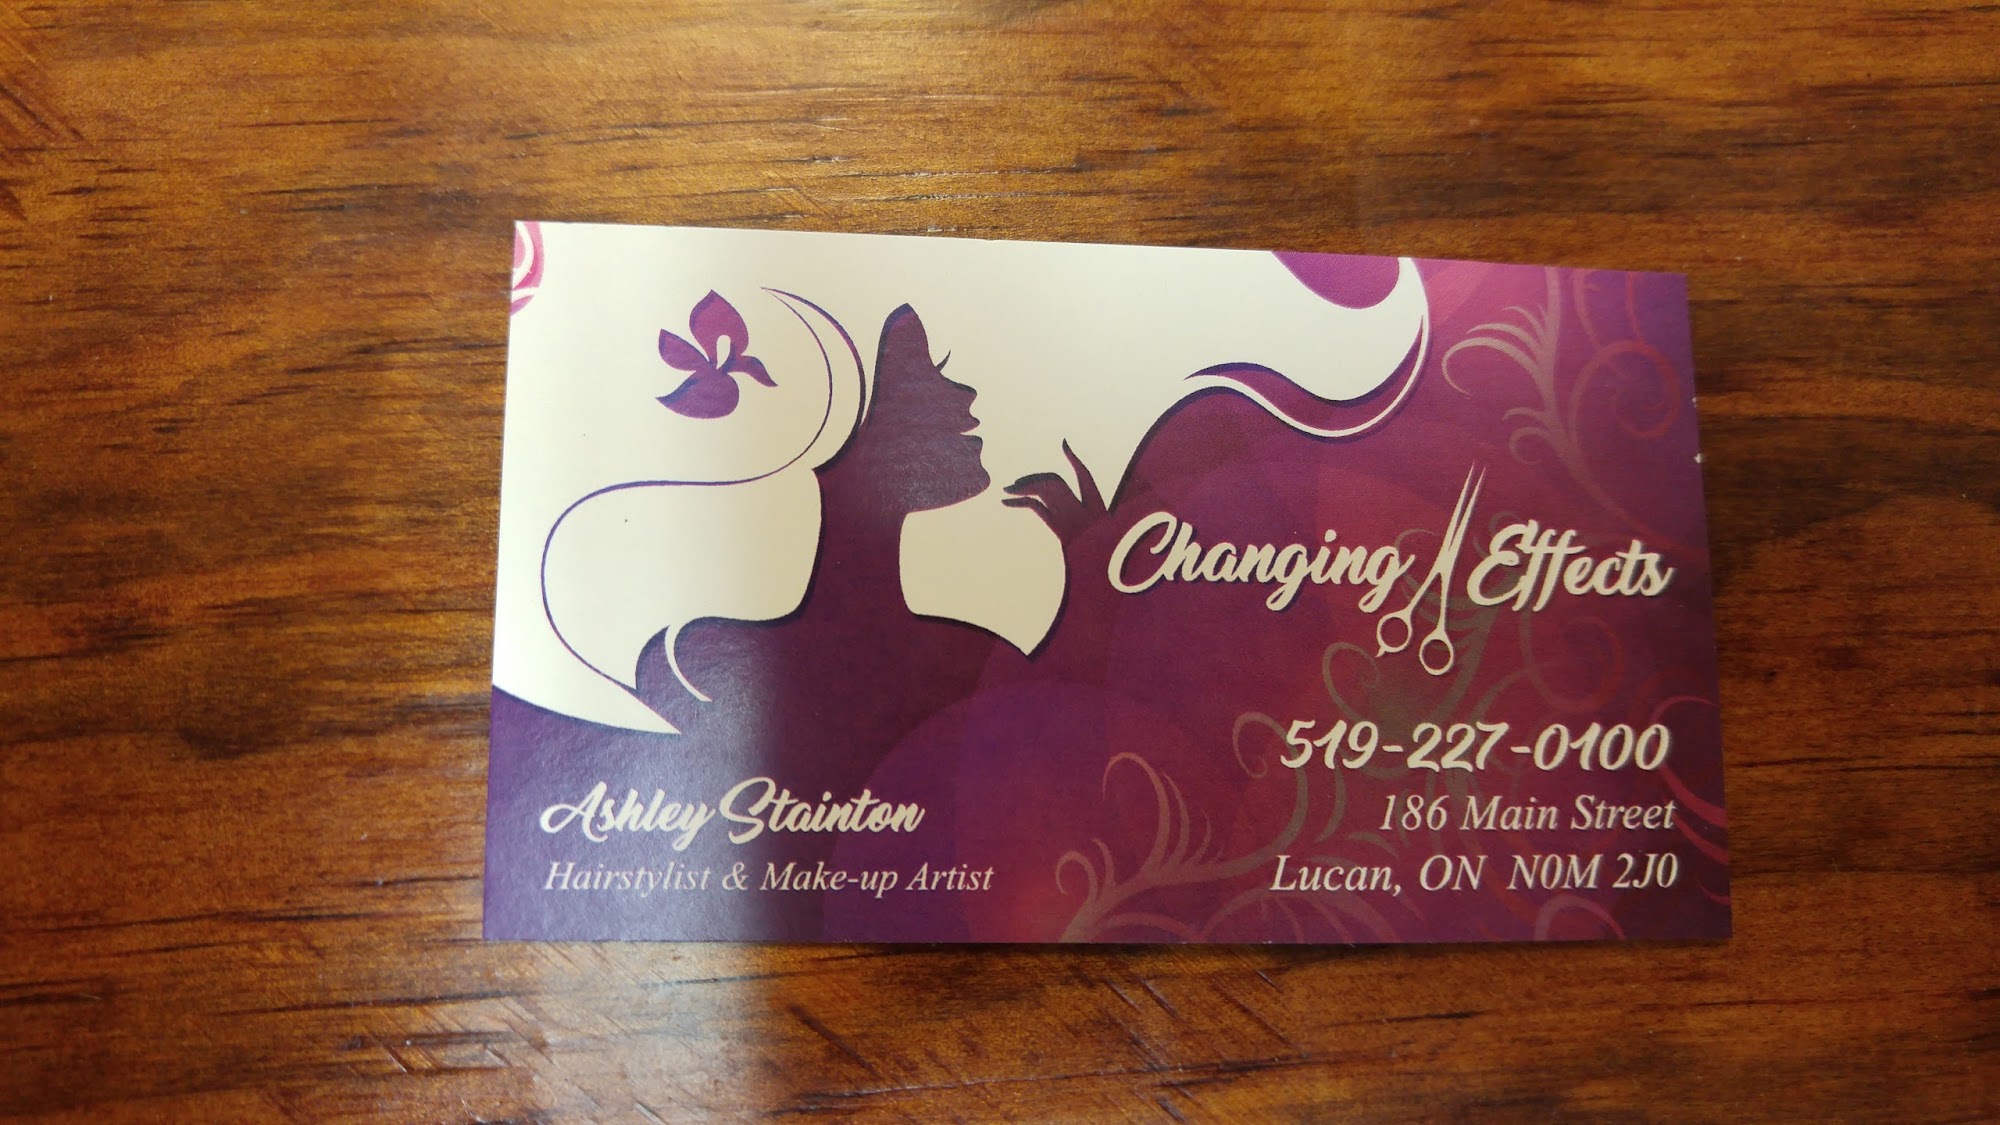 Changing Effects 186 Main St, Lucan Ontario N0M 2J0